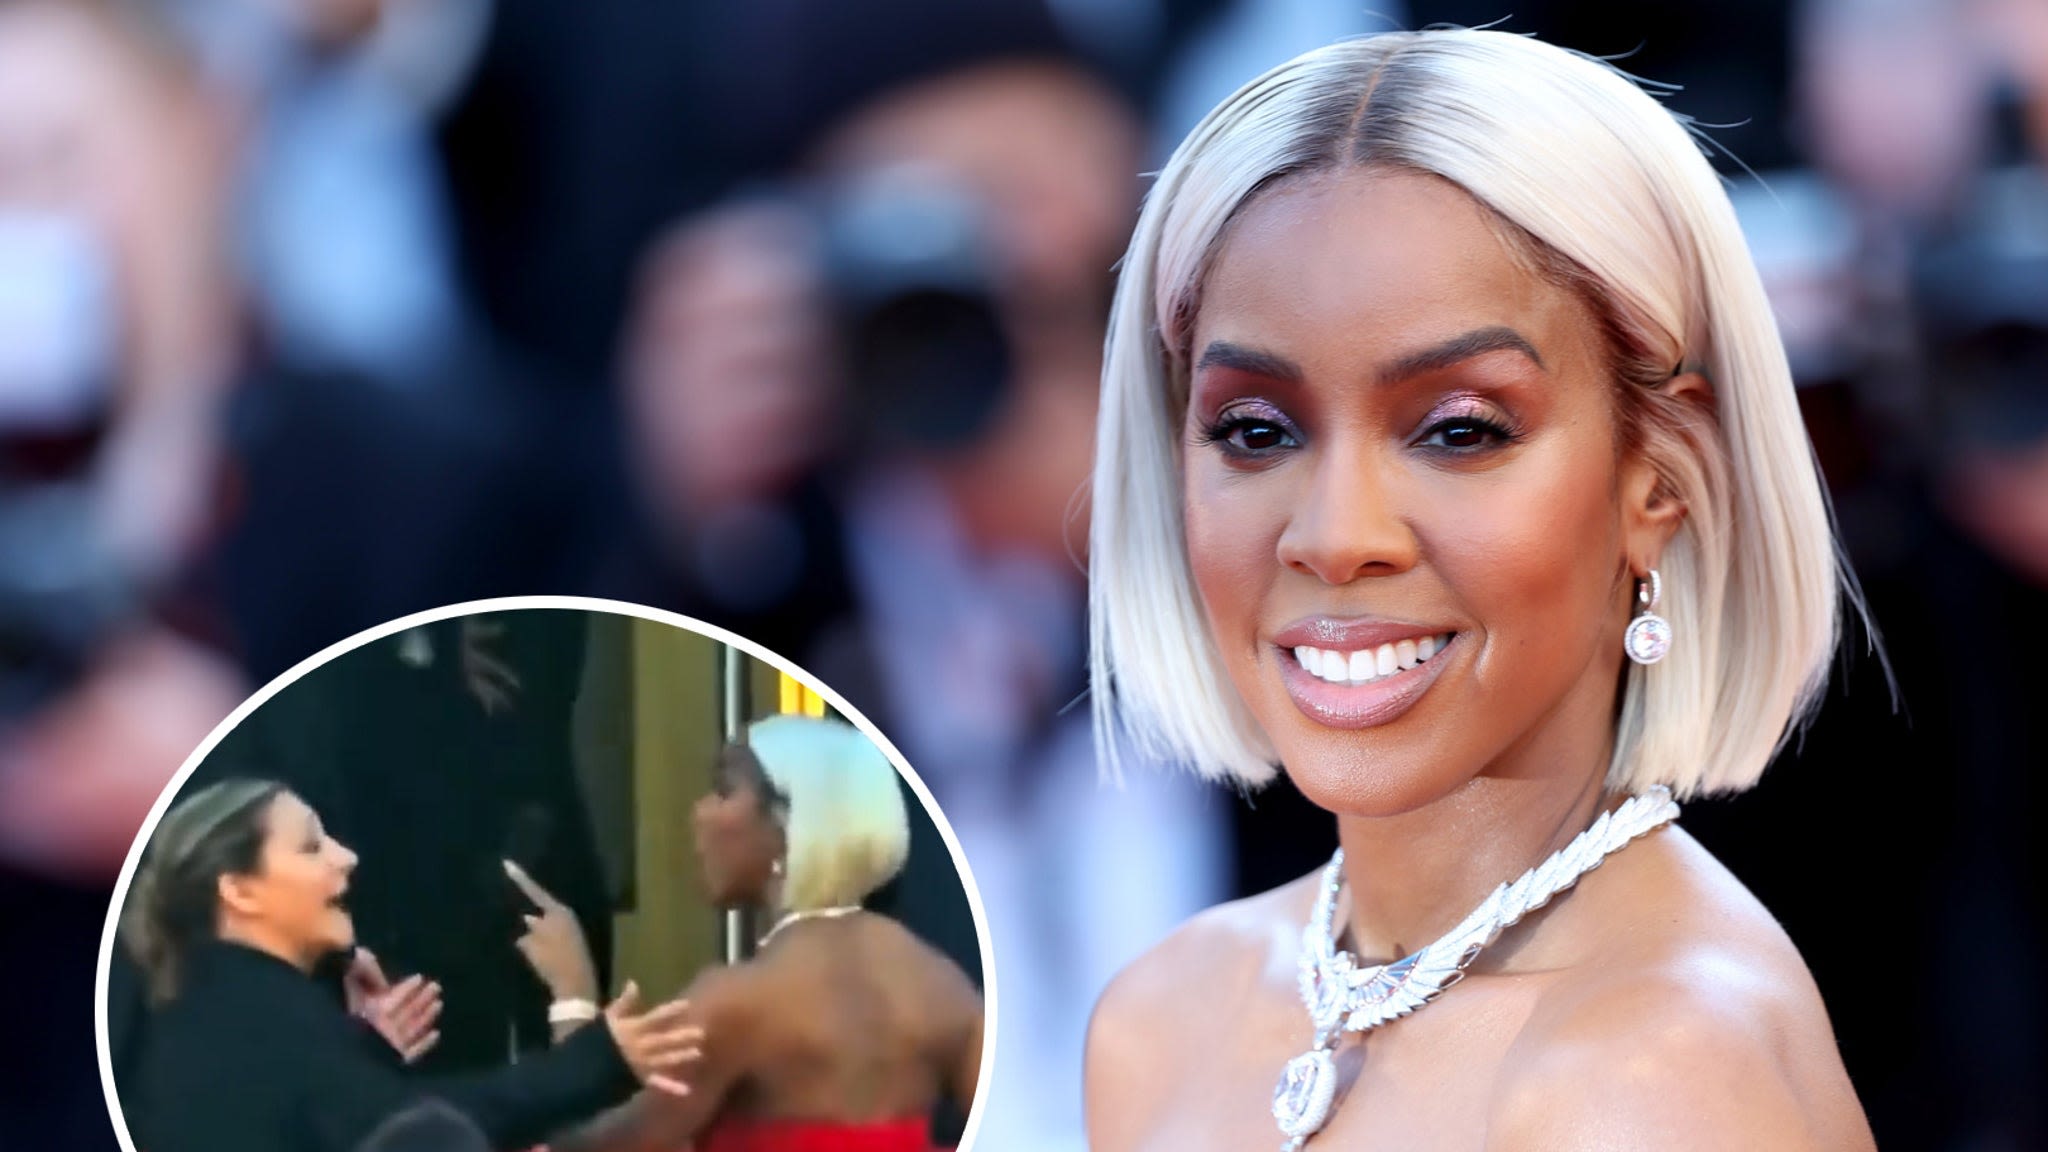 Lip Reader Confirms What Kelly Rowland Said During Tense Red Carpet Moment at Cannes